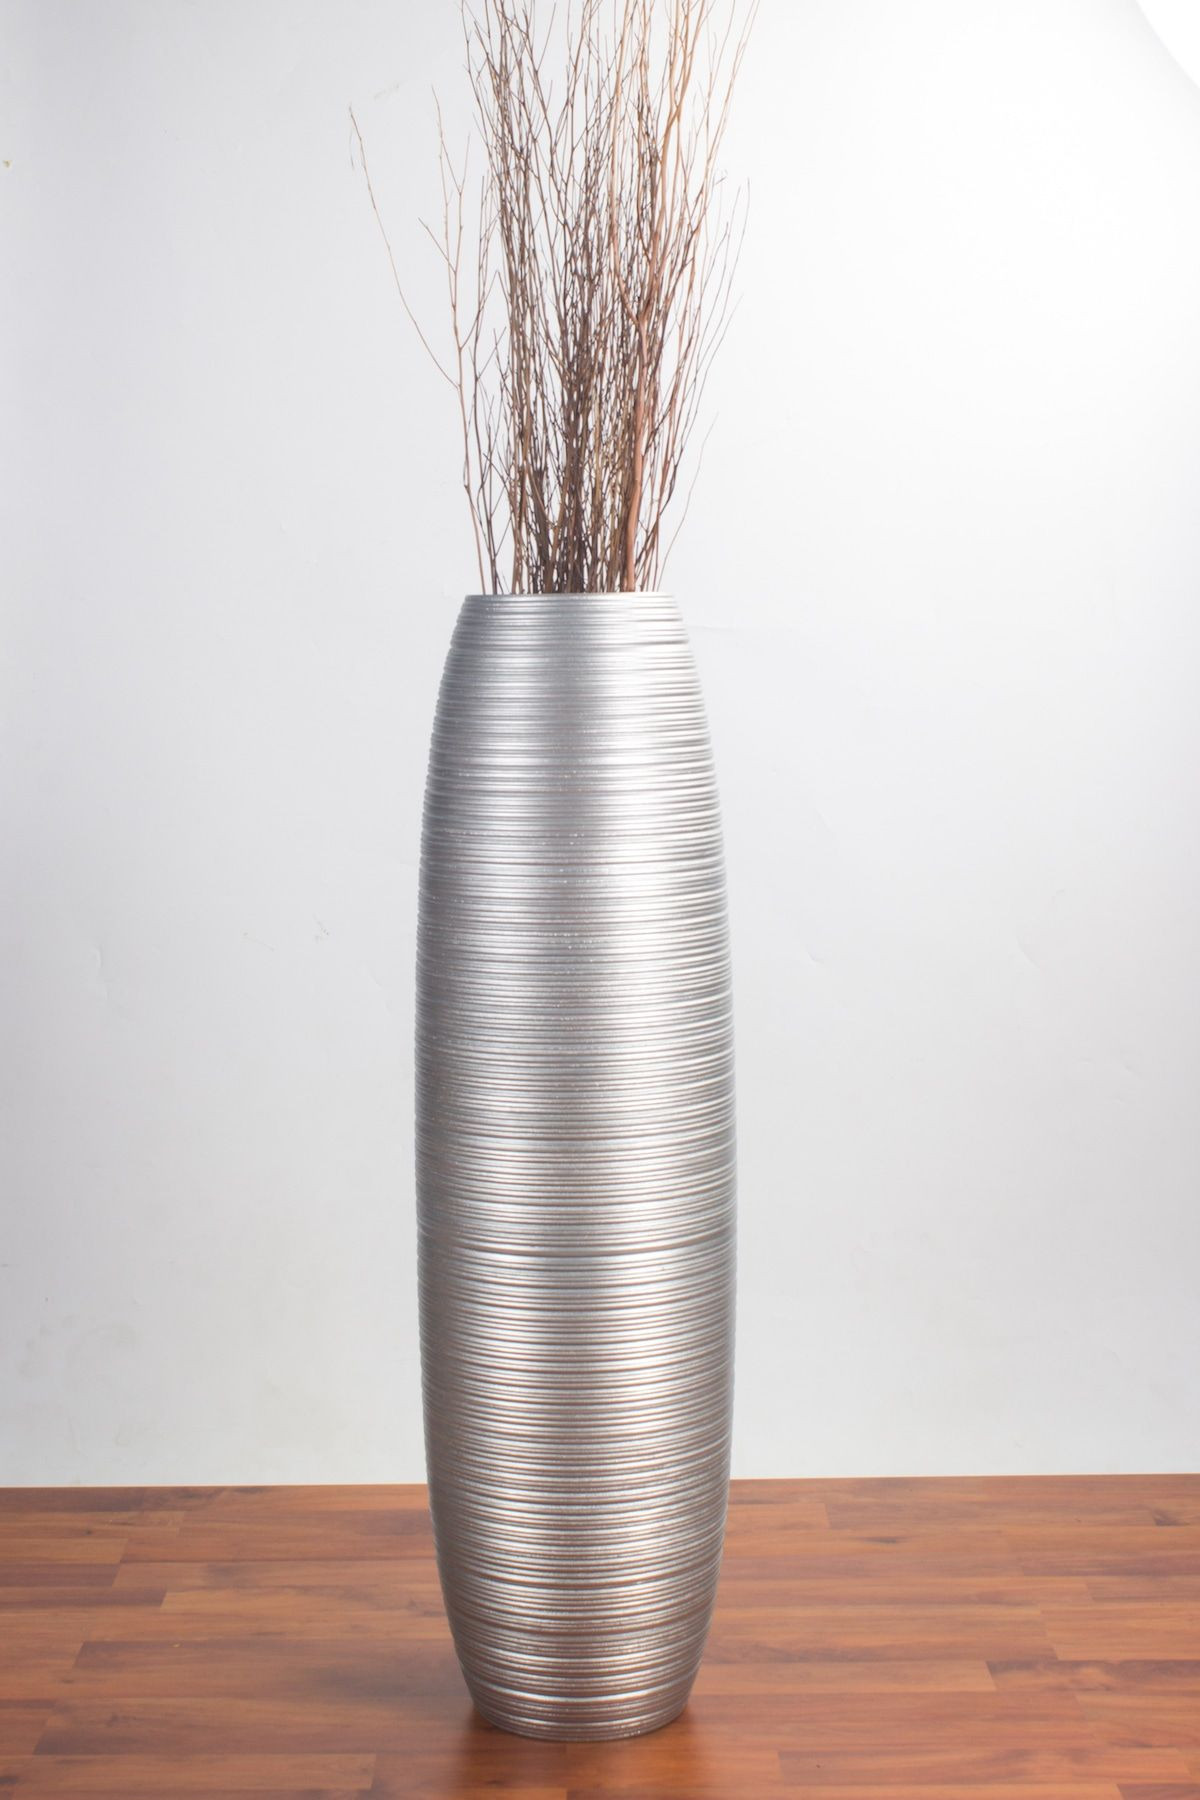 11 attractive Large Wicker Floor Vase 2024 free download large wicker floor vase of wicker vase tall images tall floor vase 36 inches wood silver home throughout wicker vase tall images tall floor vase 36 inches wood silver home pinterest of wicke